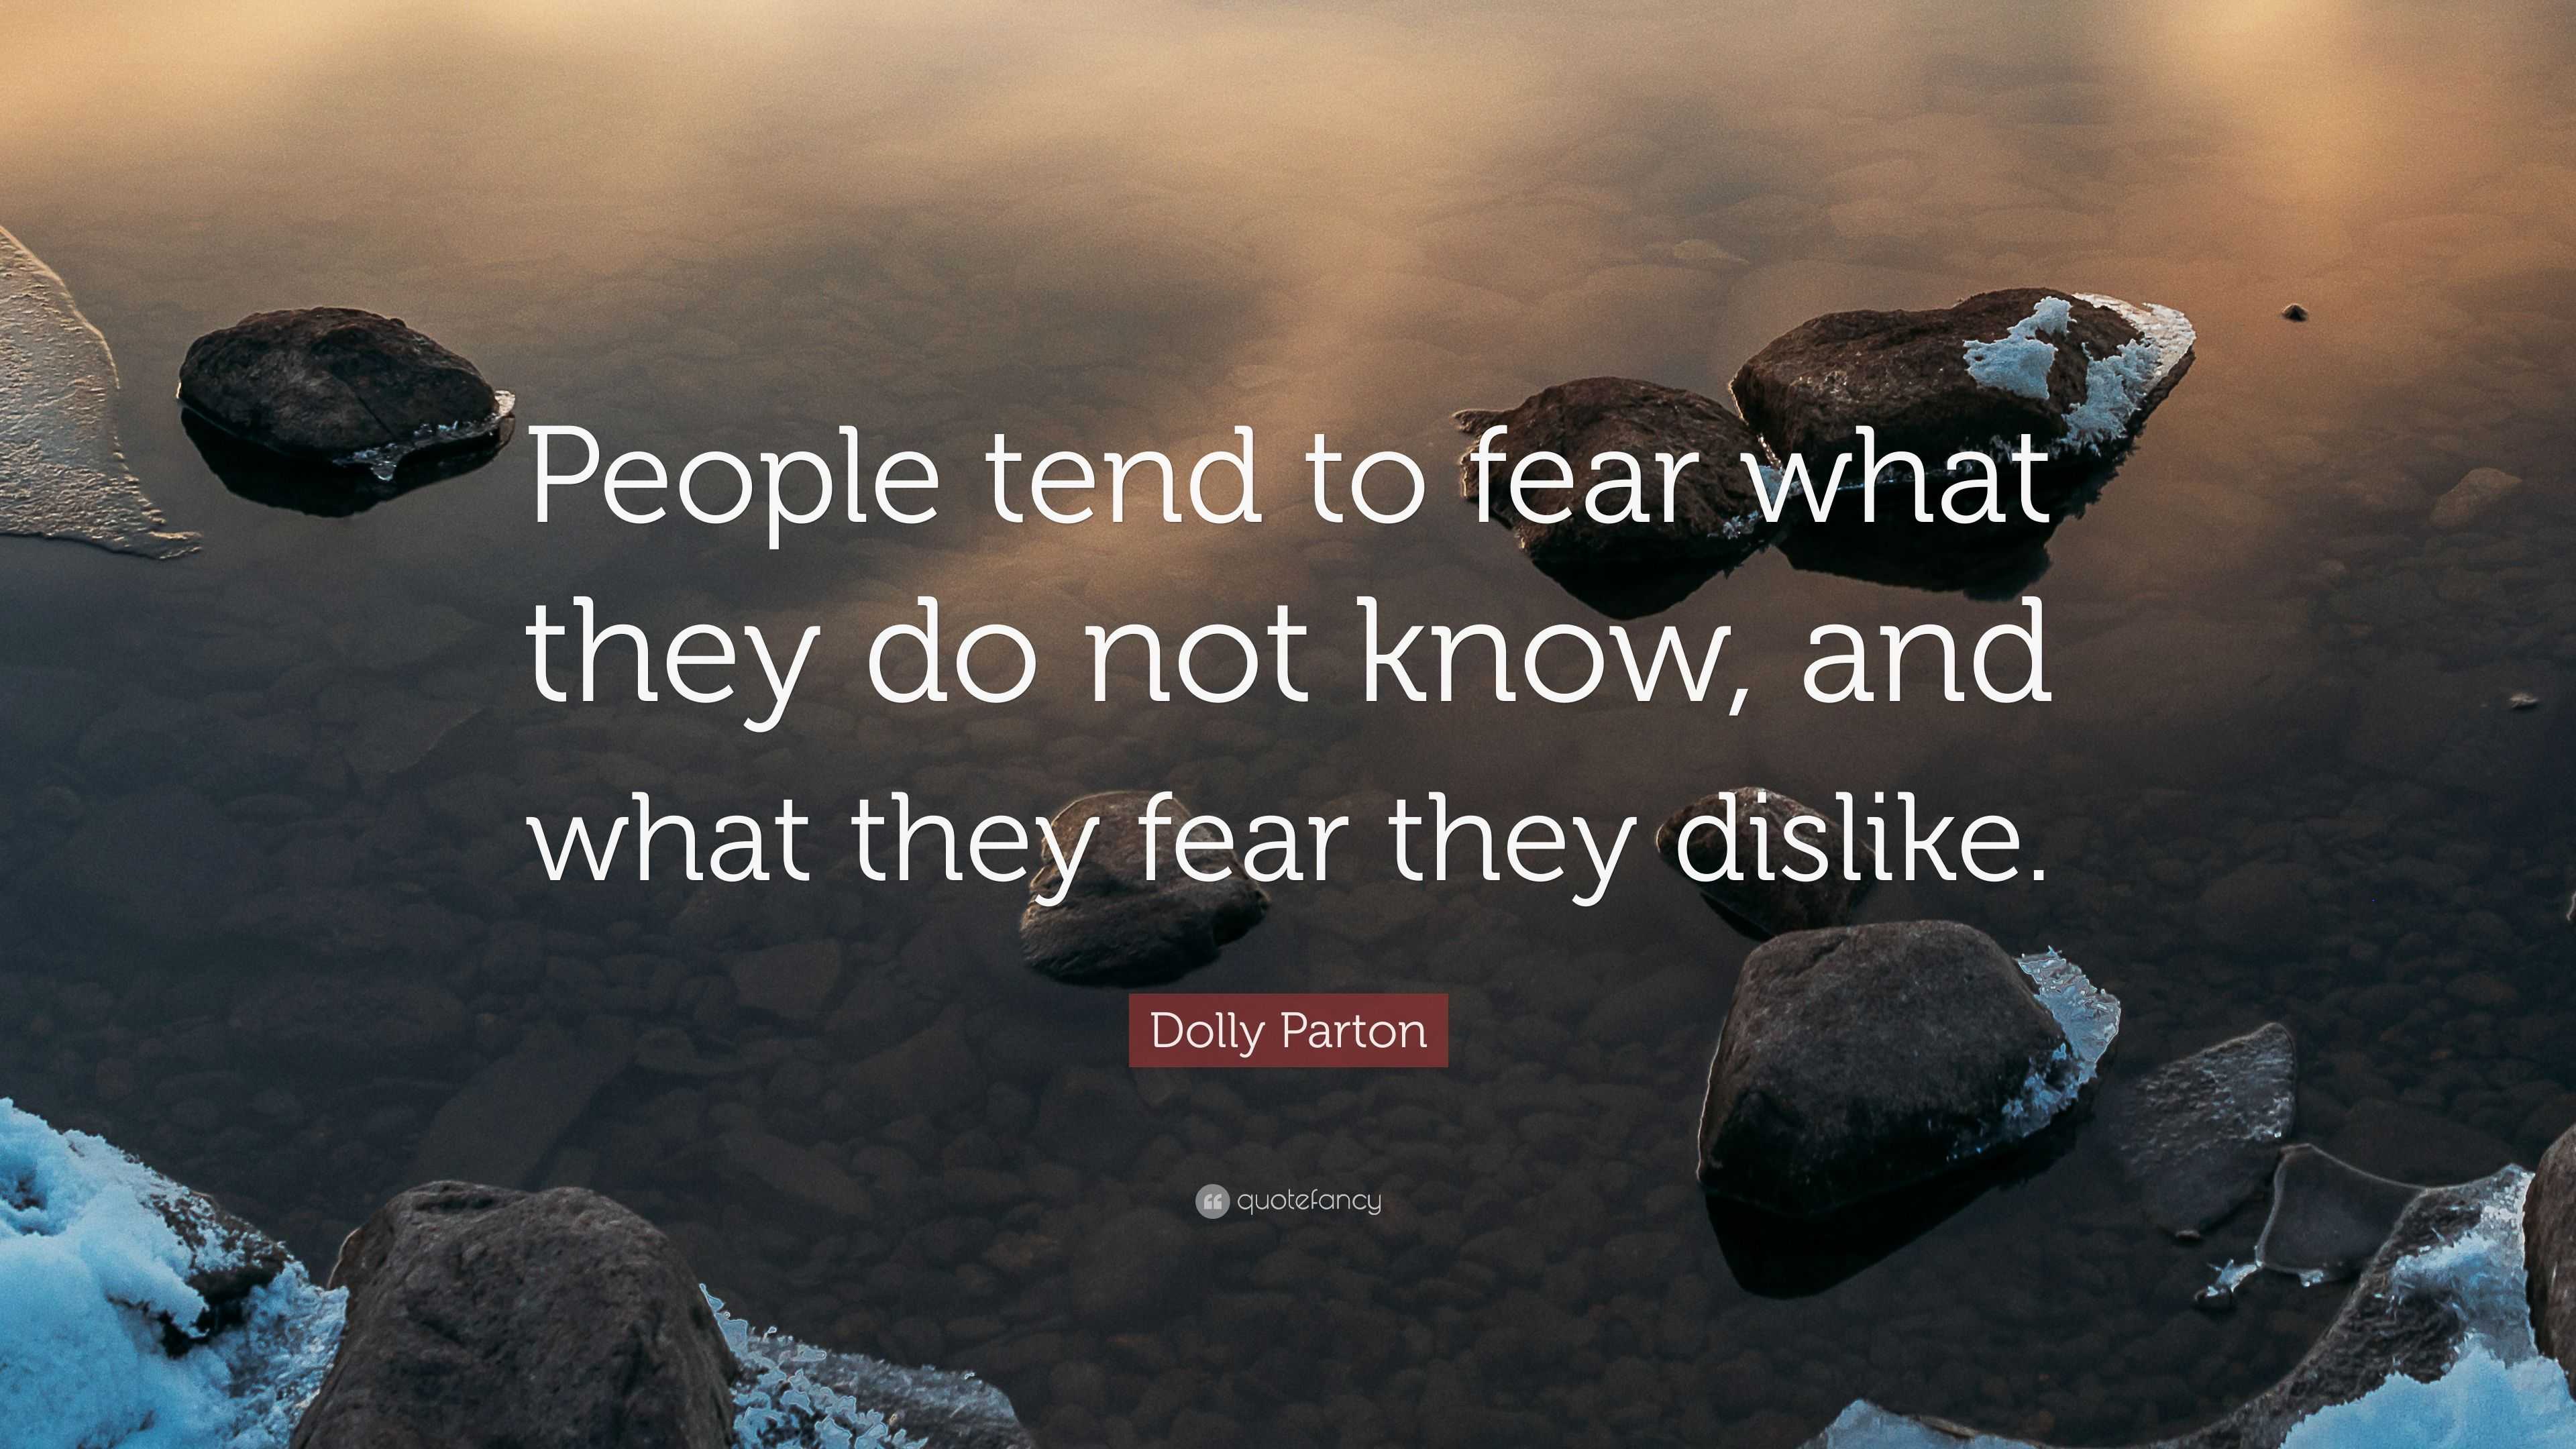 Dolly Parton Quote: “People tend to fear what they do not know, and ...